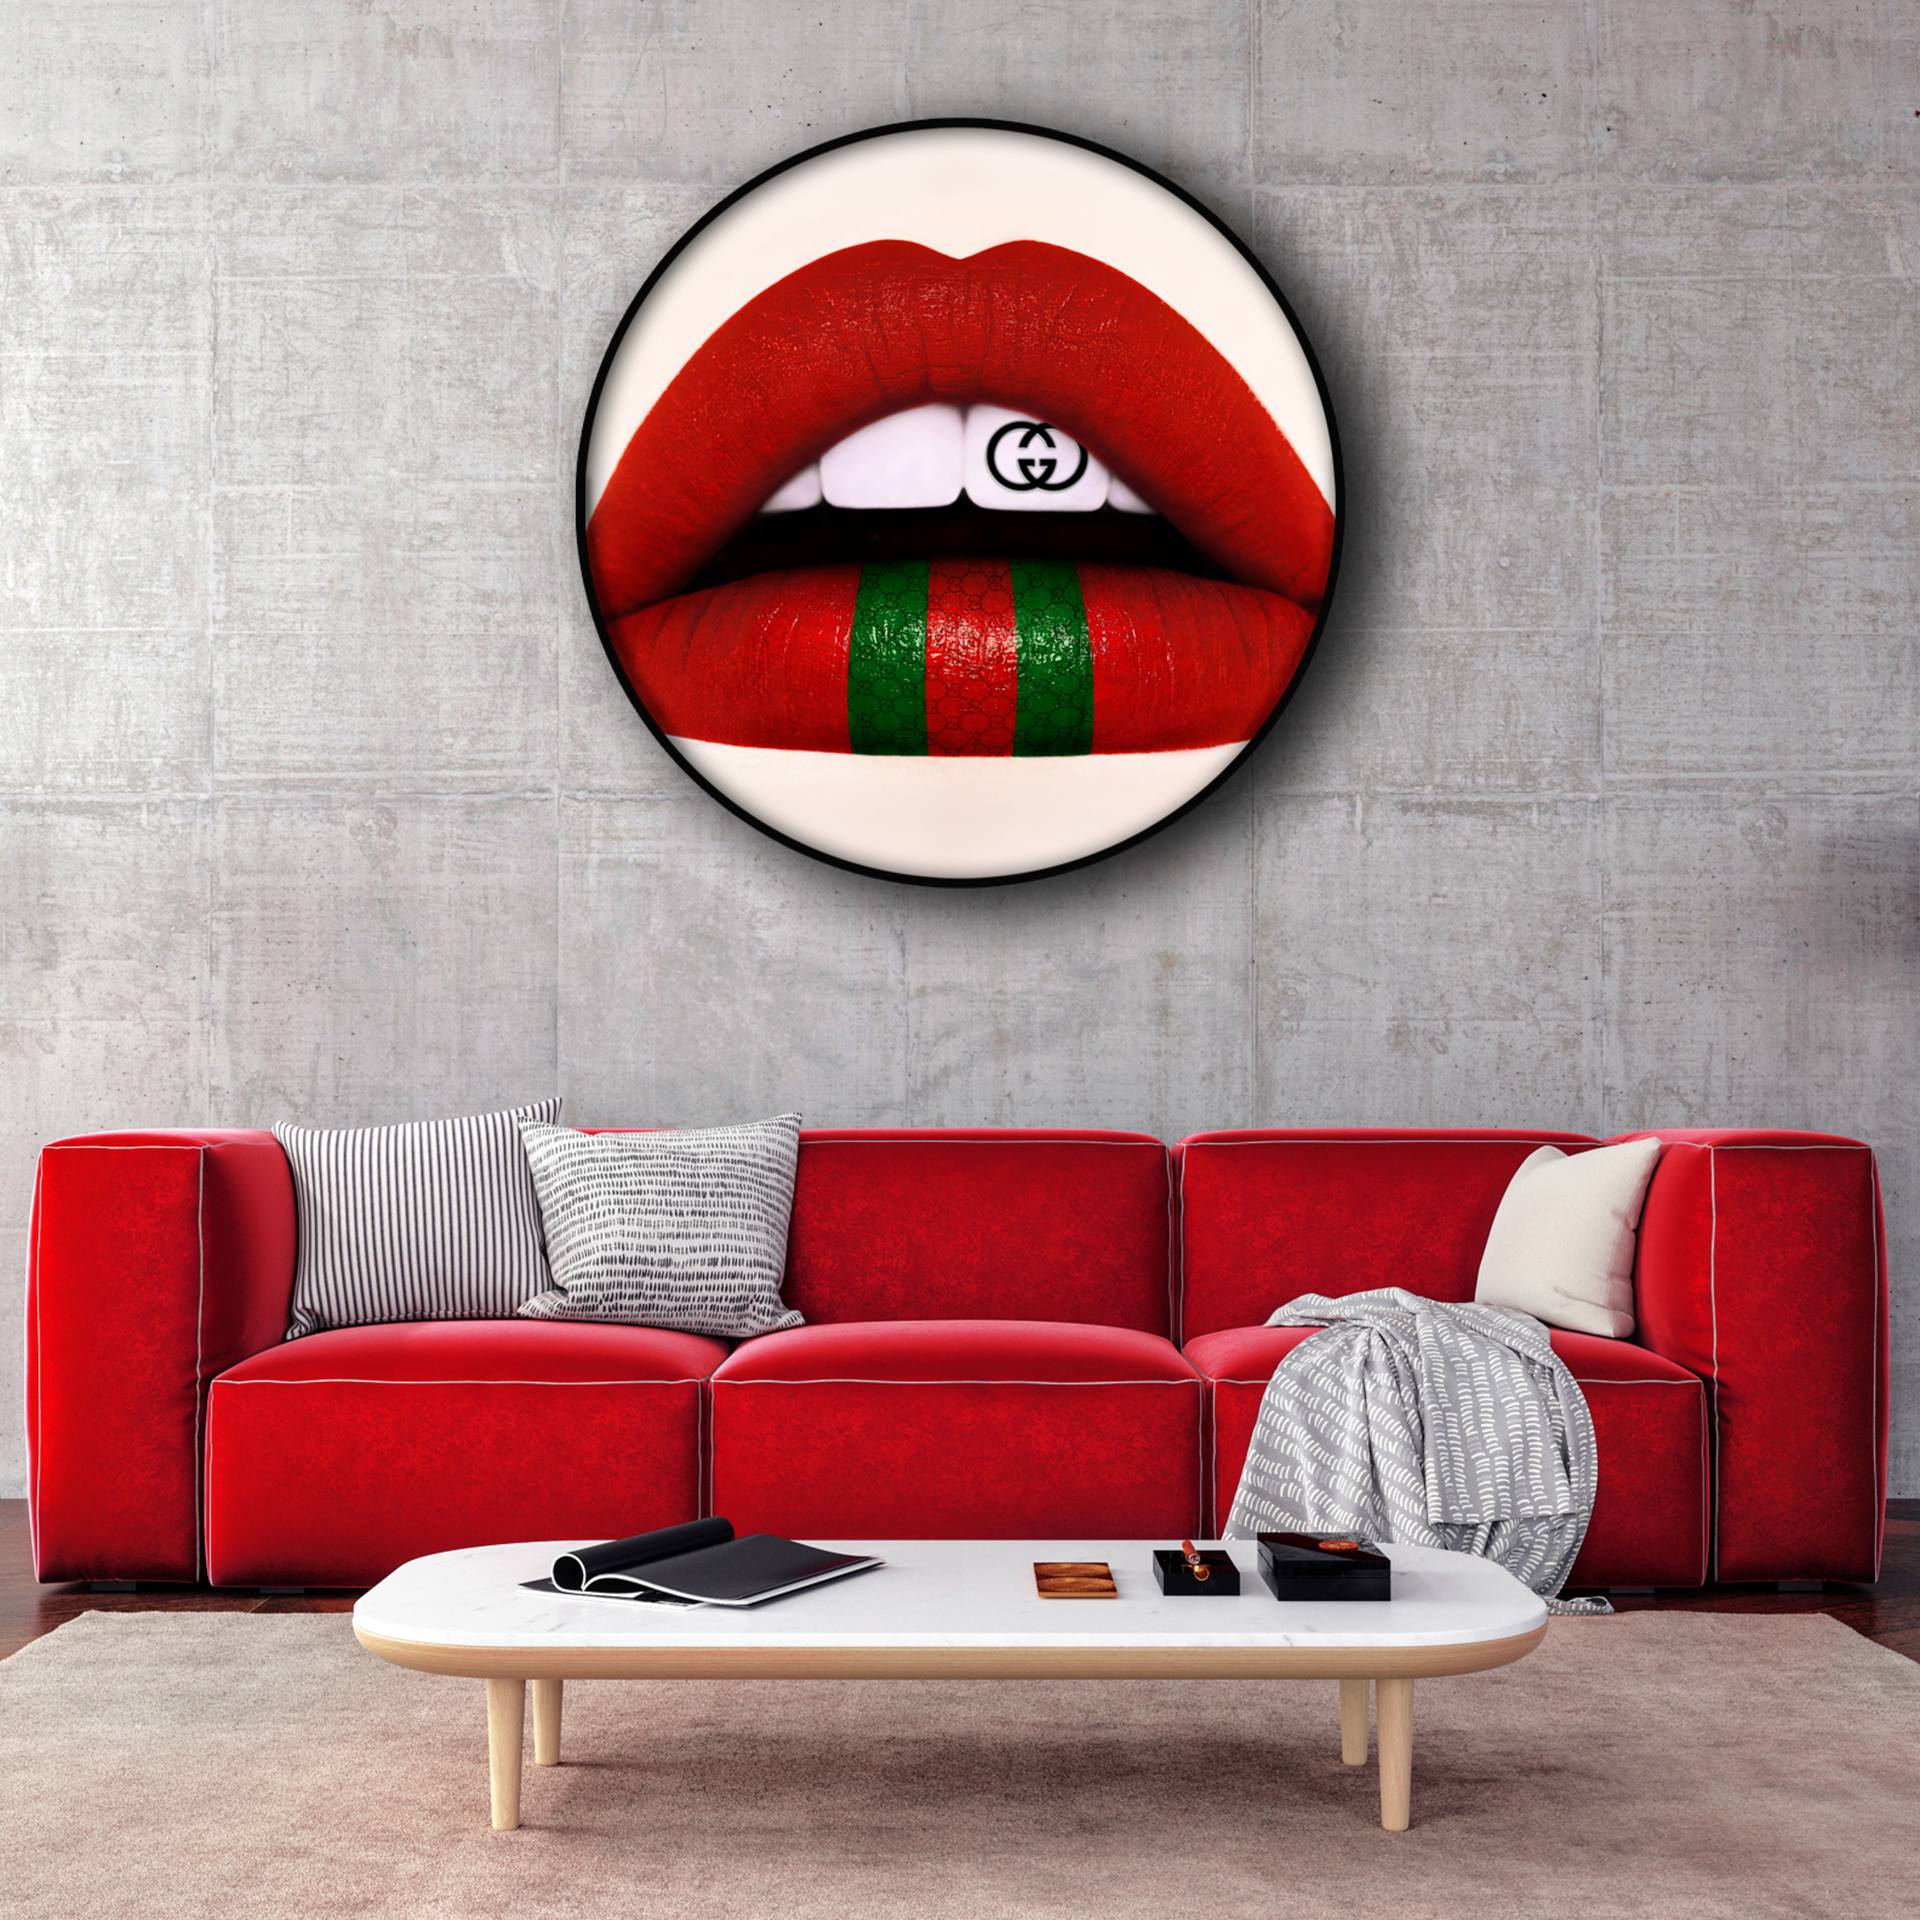 A Giuliano Bekor Fine Art Photography, Lips L2 Louis Vuitton 3D for sale at  auction on 28th July